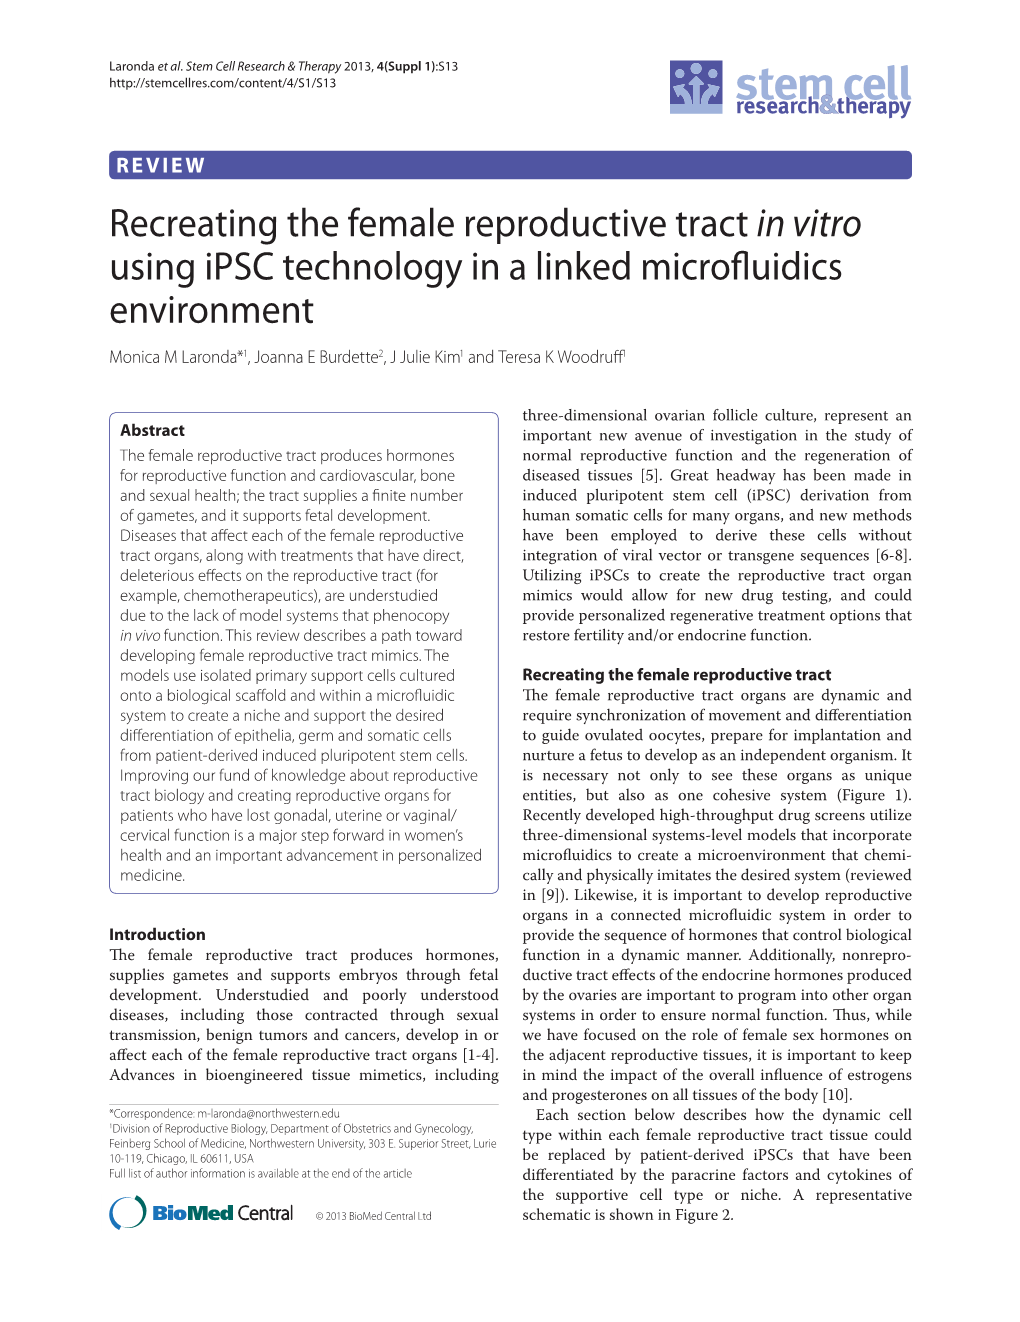 VIEW Recreating the Female Reproductive Tract in Vitro Using Ipsc Technology in a Linked Microfl Uidics Environment